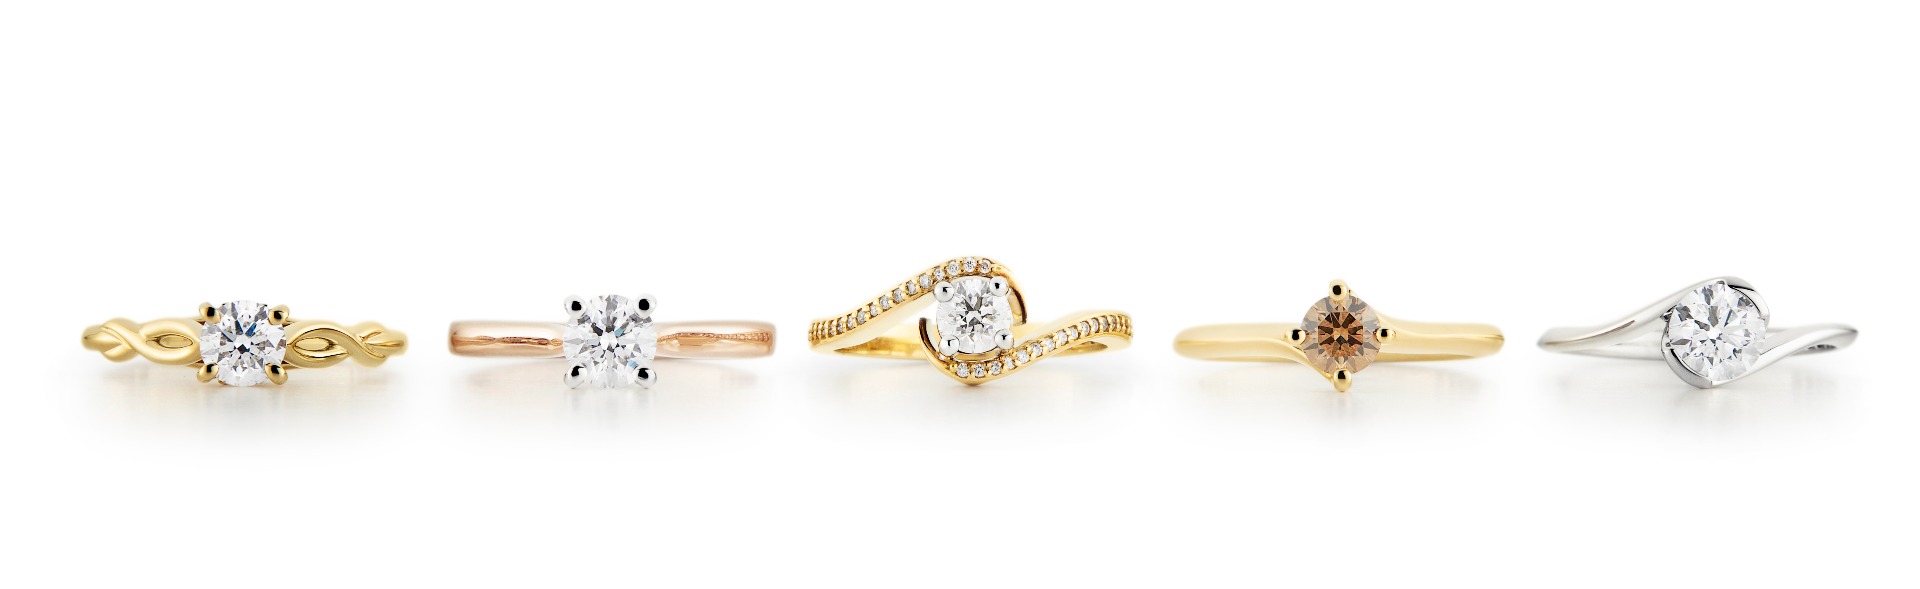 popular types of engagement rings